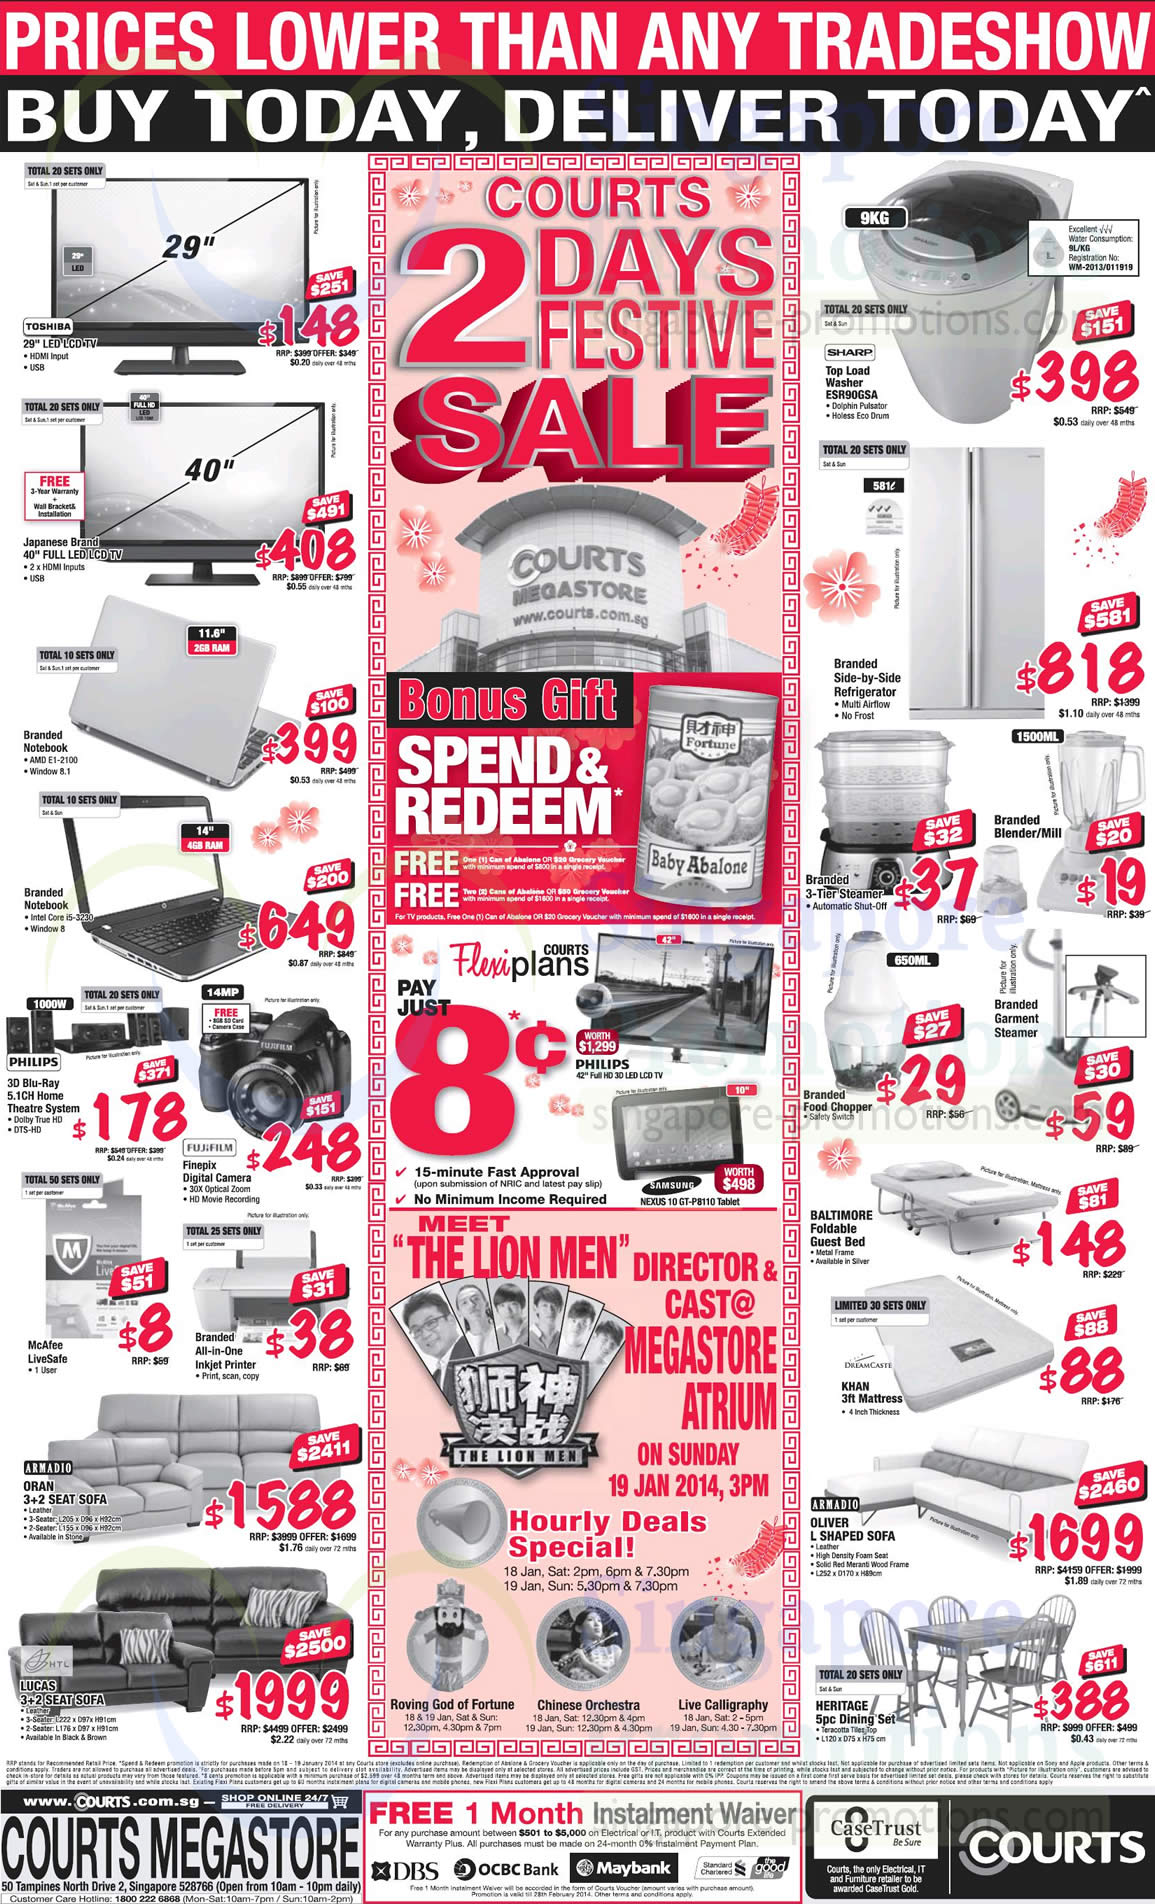 Featured image for Courts 3 Days Festive Sale Offers 17 - 19 Jan 2014